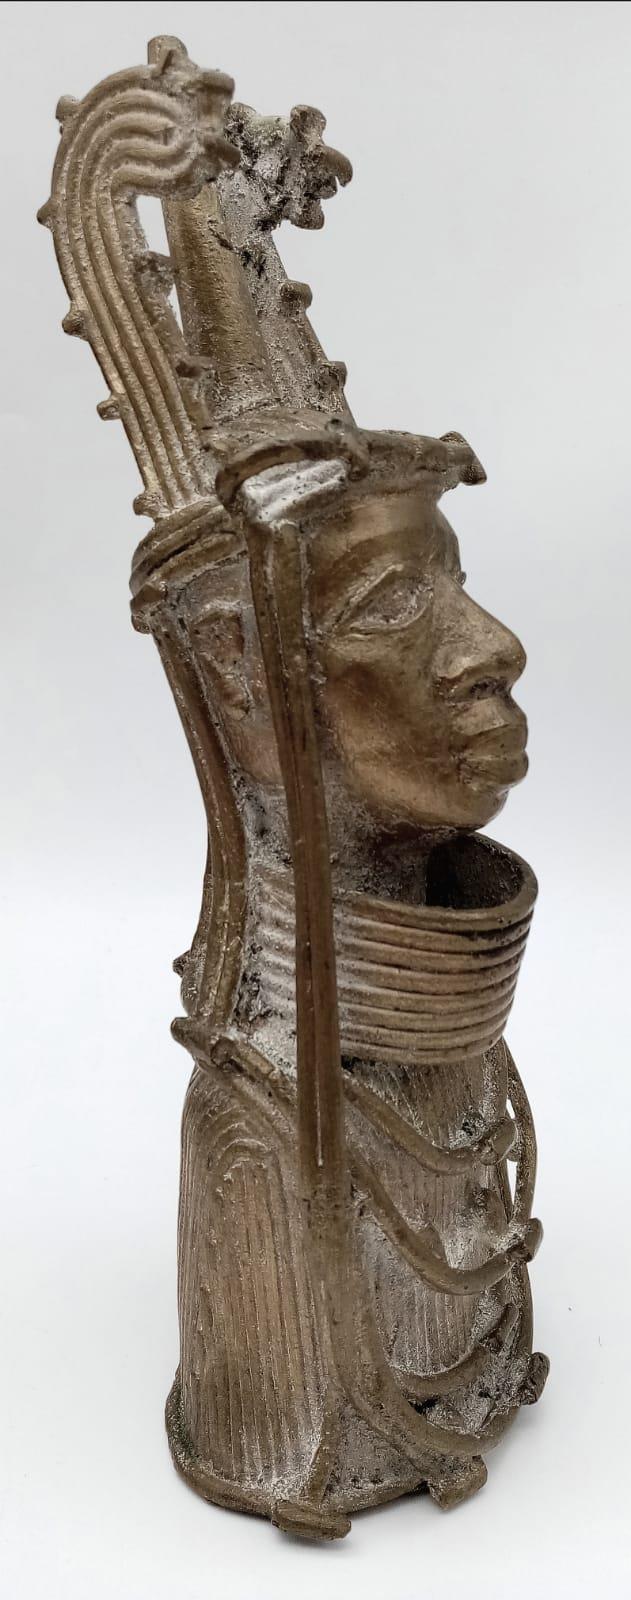 A Unique African Statue. Magnetically tested, no attraction, and when tapped produces a nice ring. - Image 3 of 7